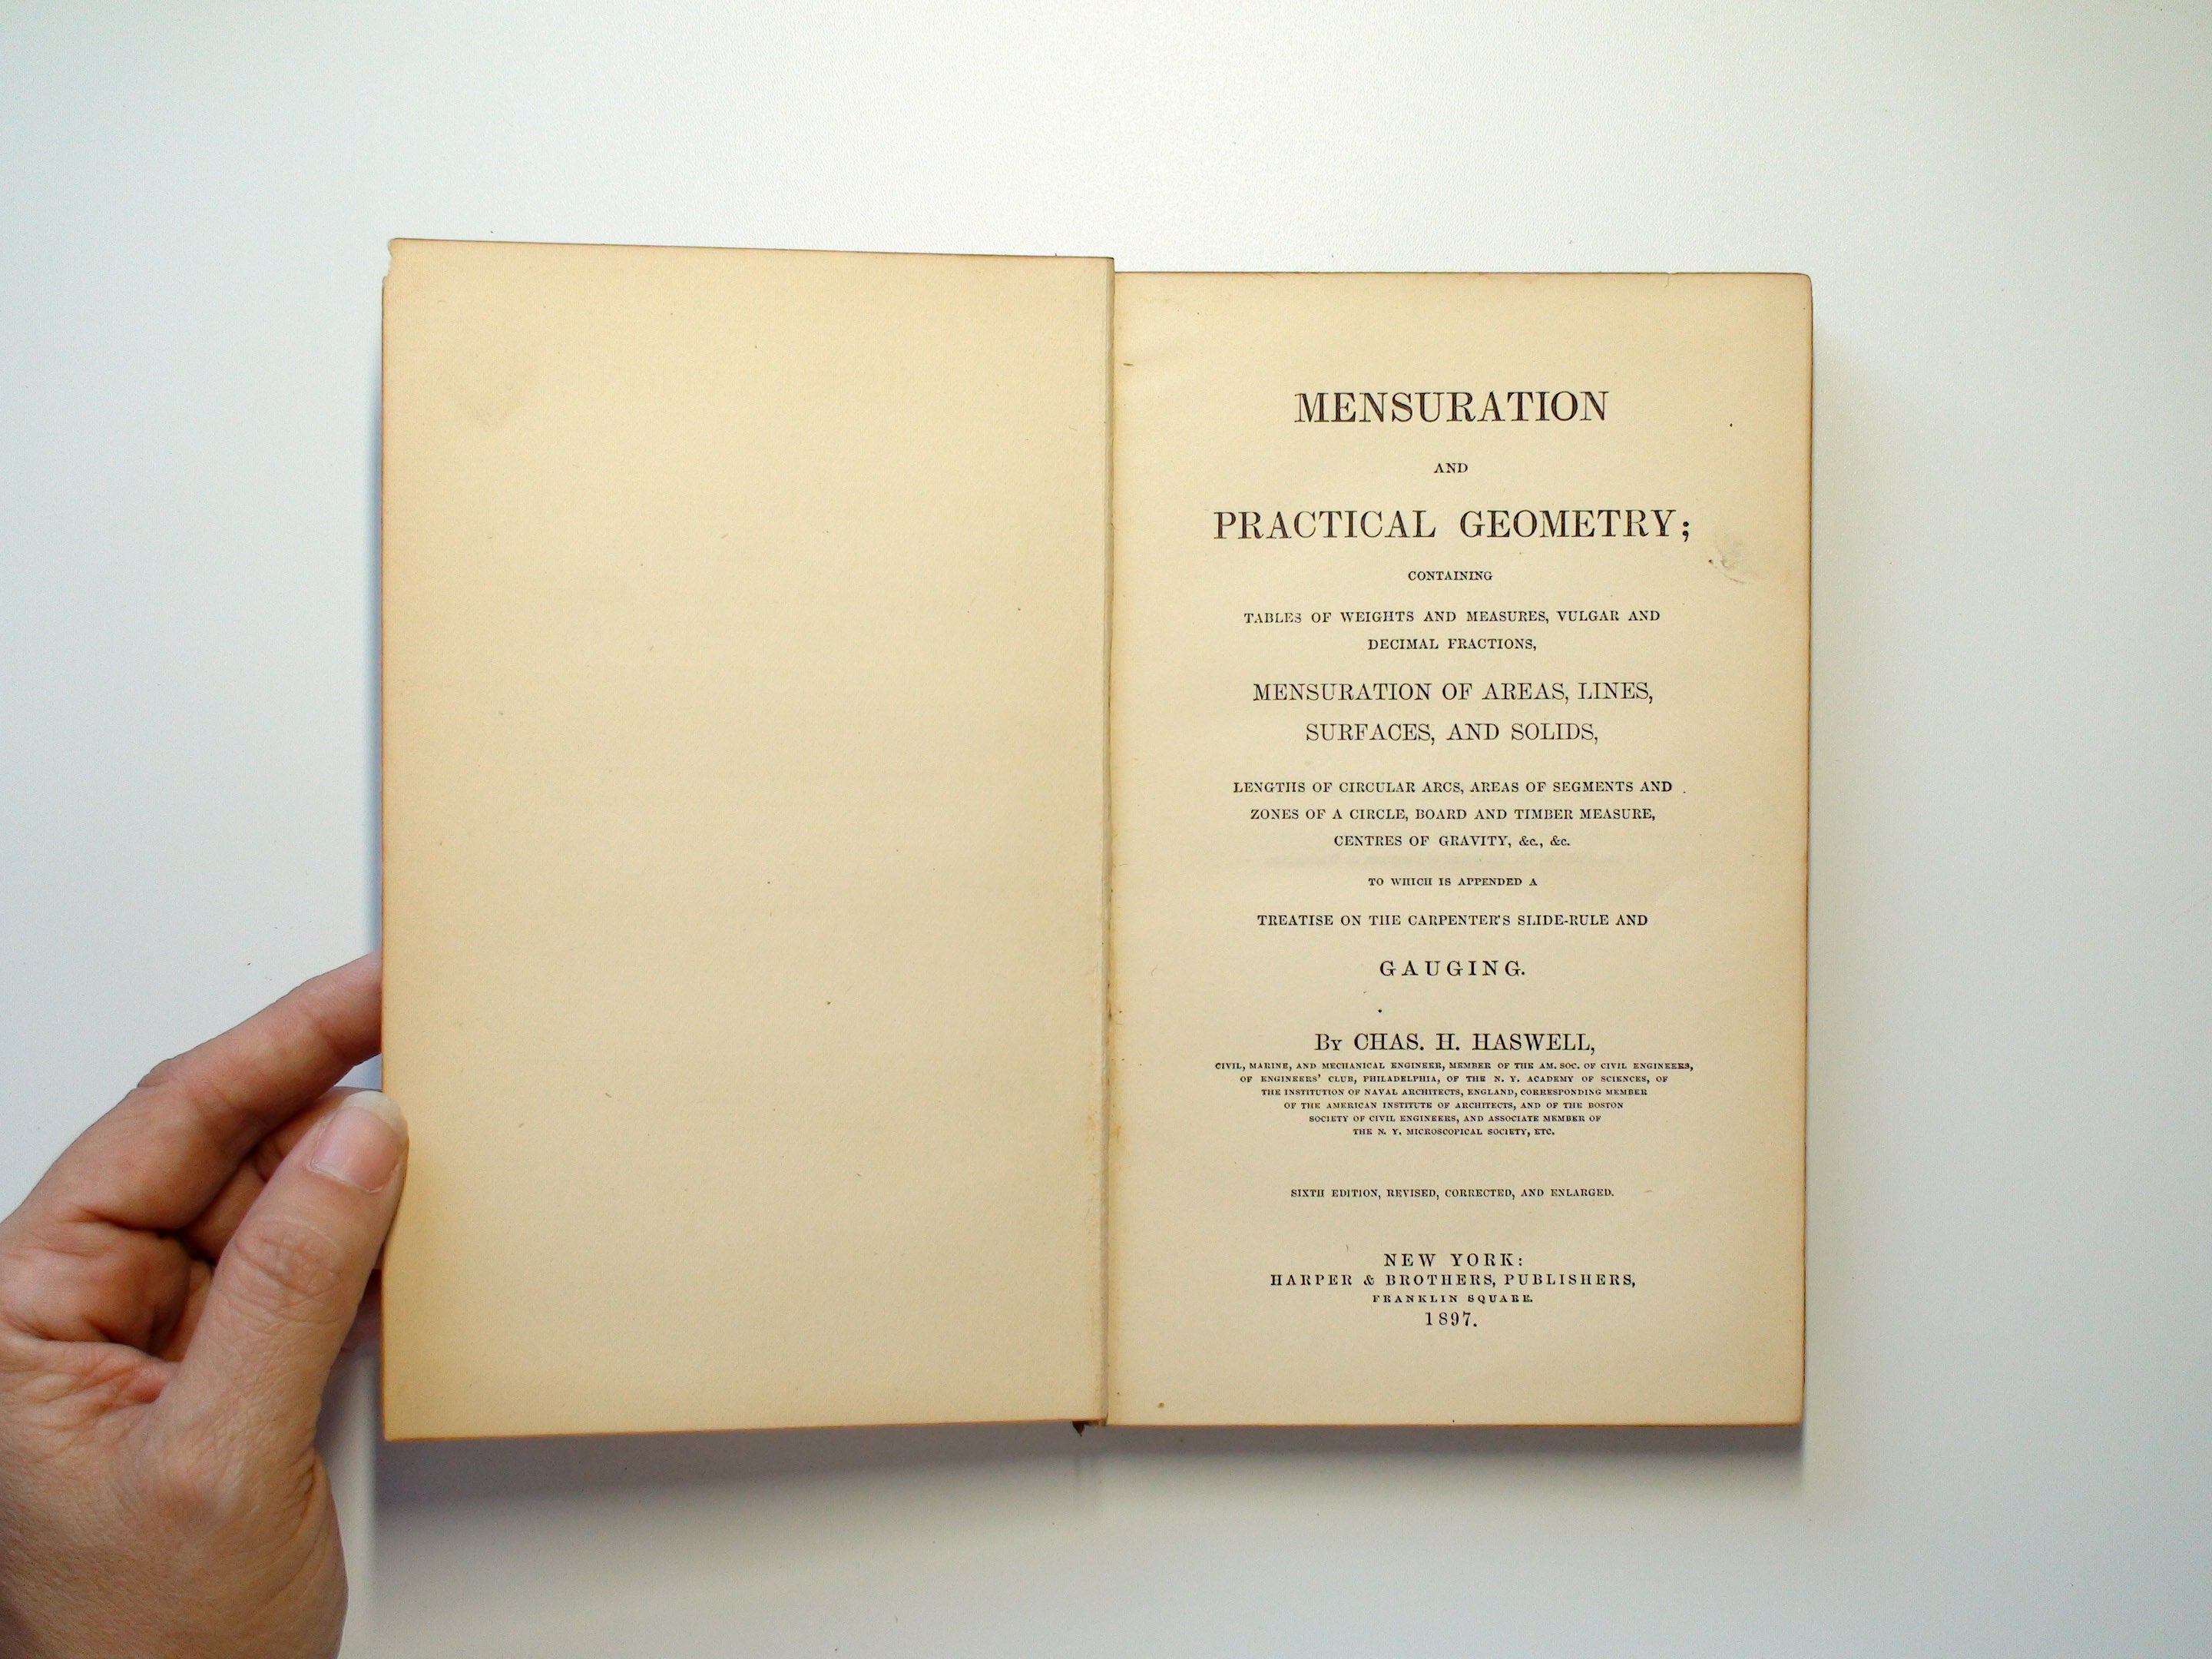 Mensuration And Practical Geometry, Chas H. Haswell, Illustrated, 1897